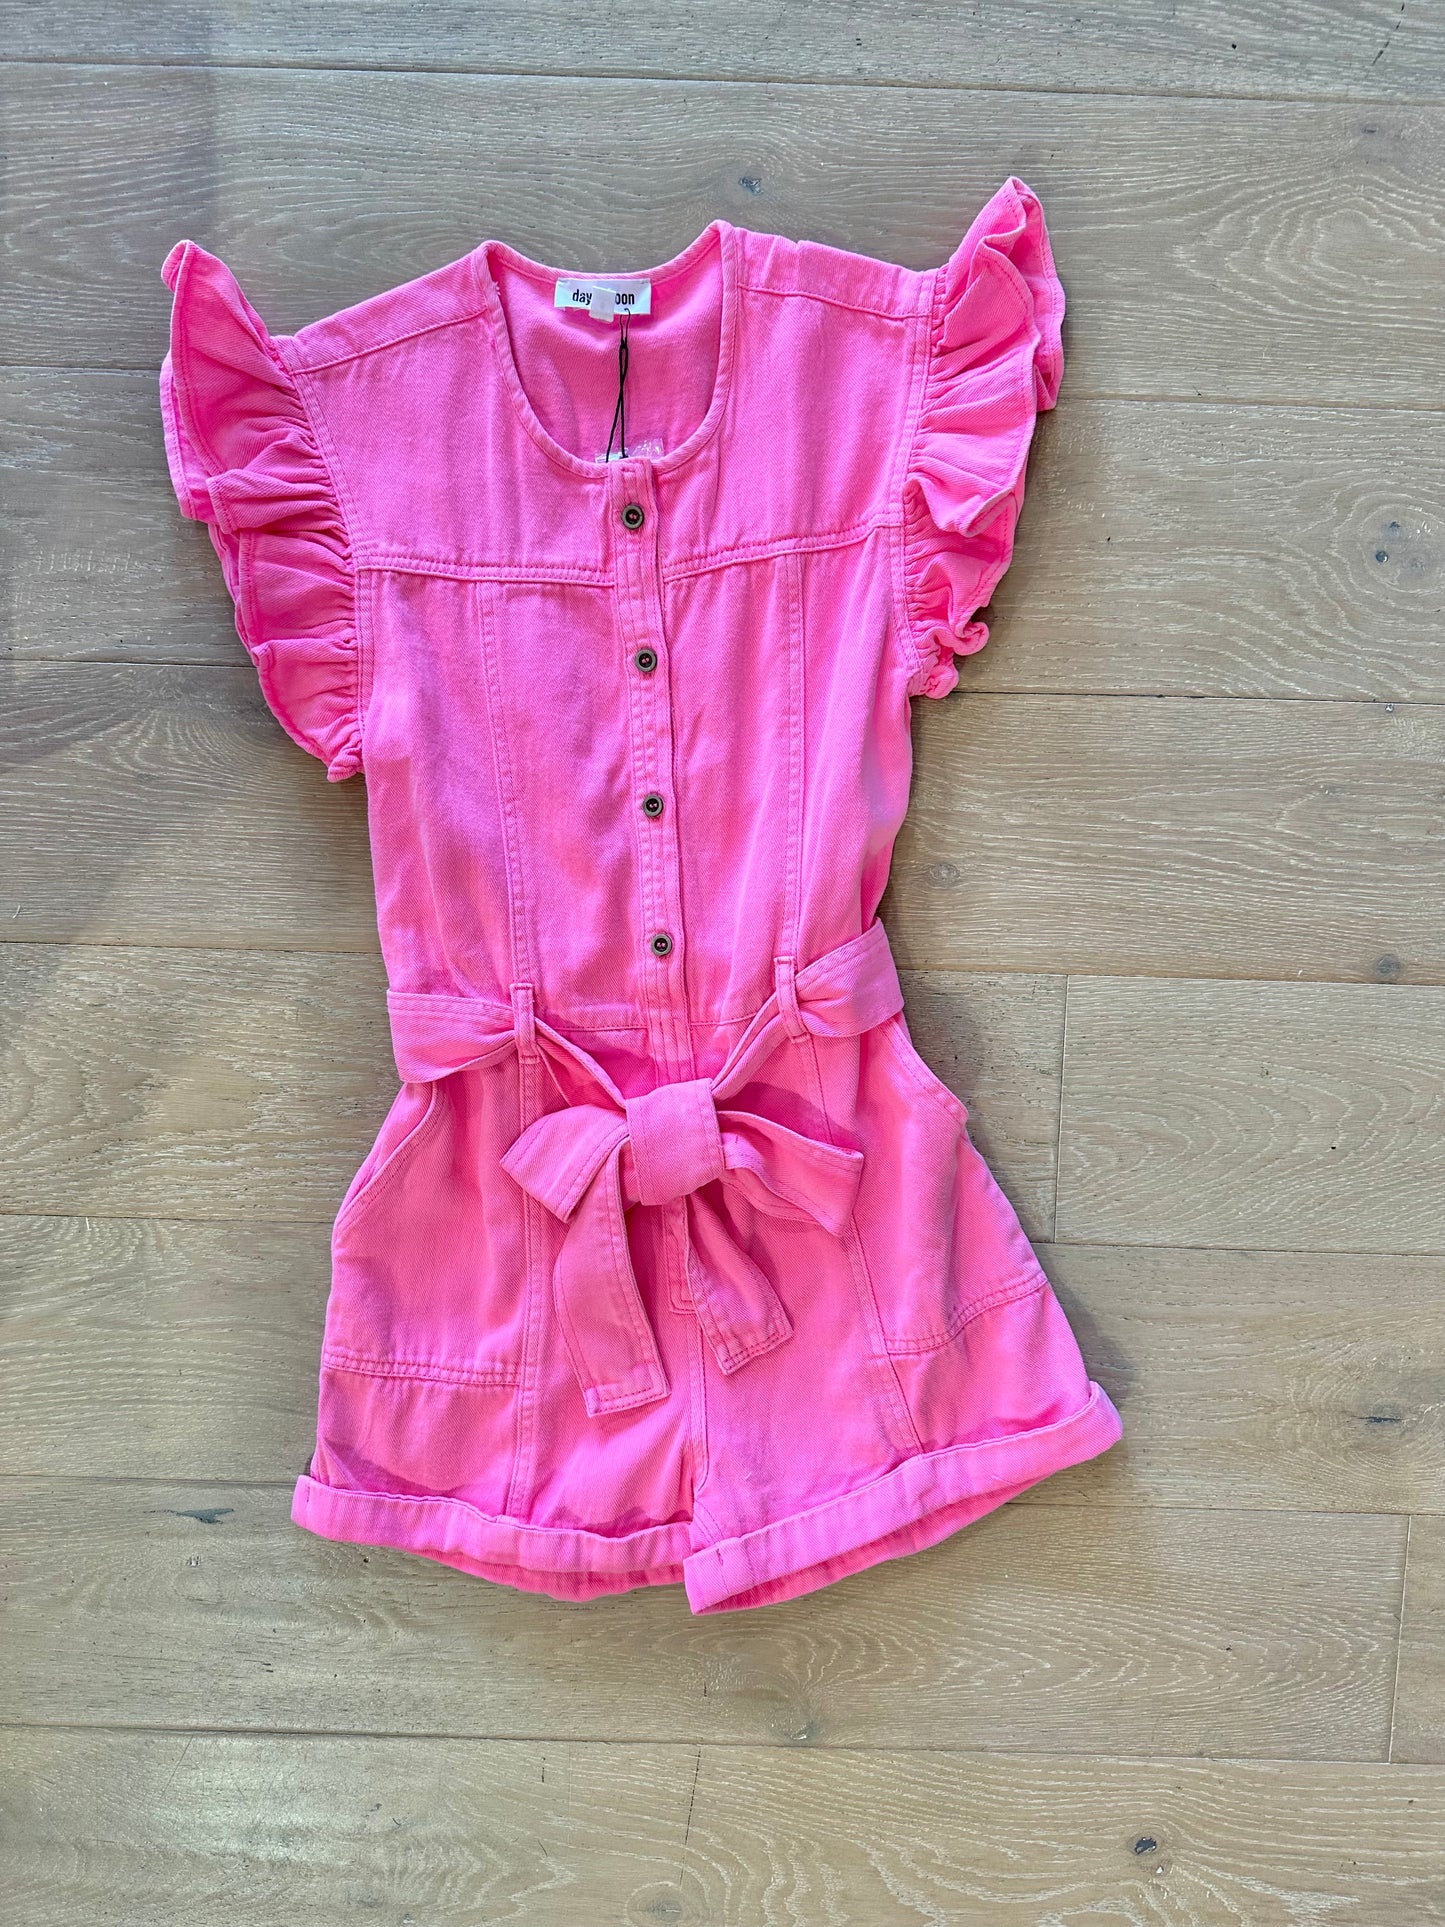 The Dolly Romper